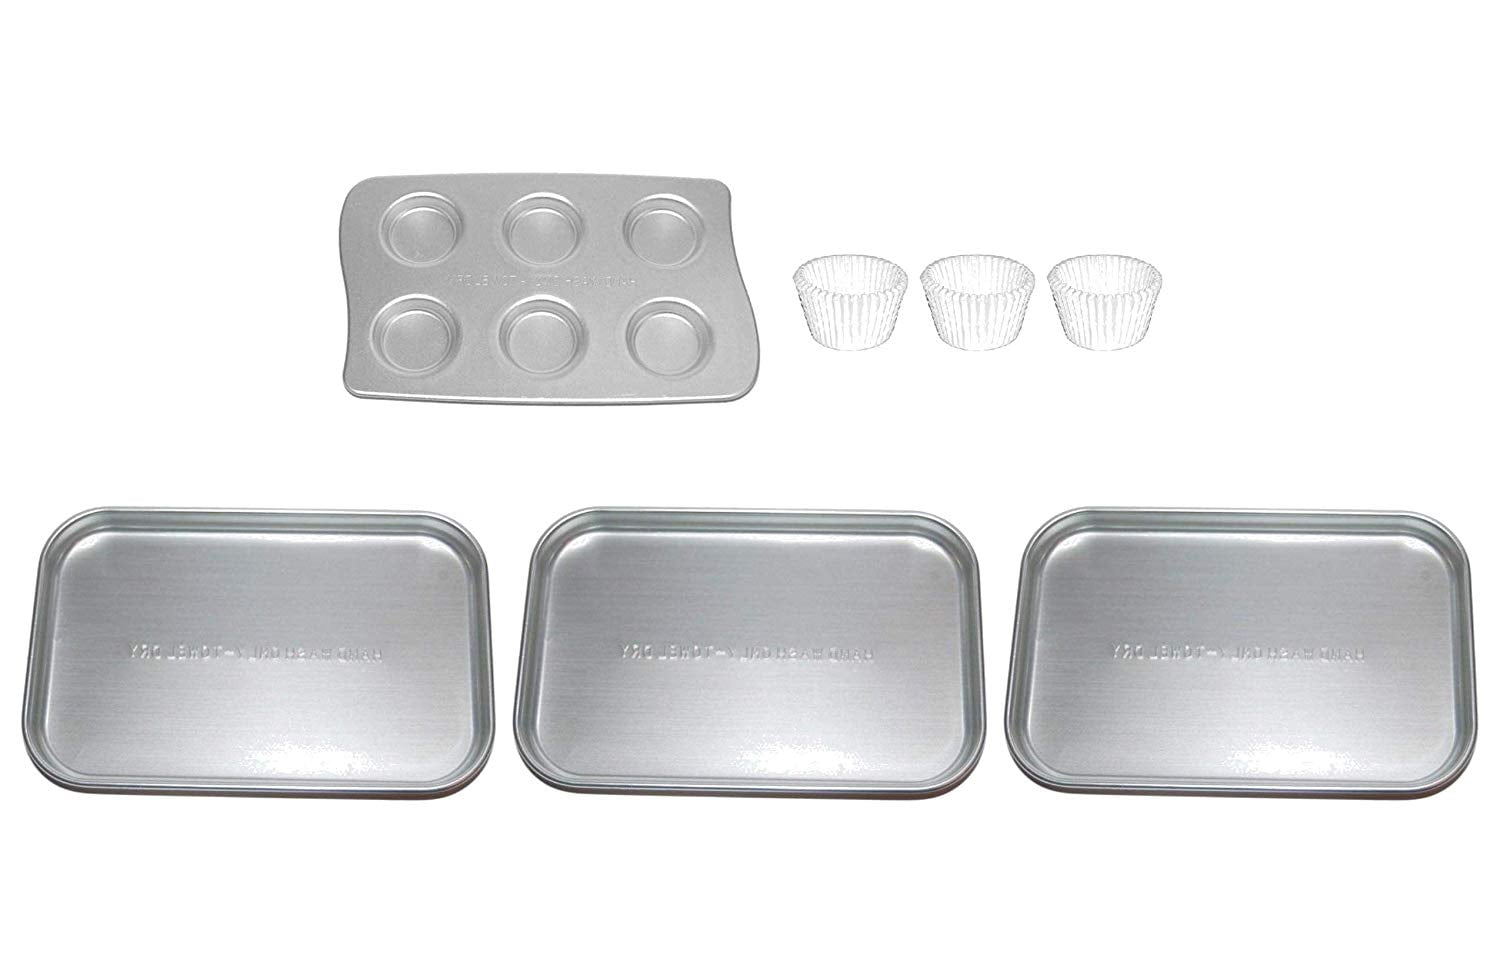 Baking Pan Set for EASY BAKE Ultimate Oven Brand New Replacement Non-OEM 